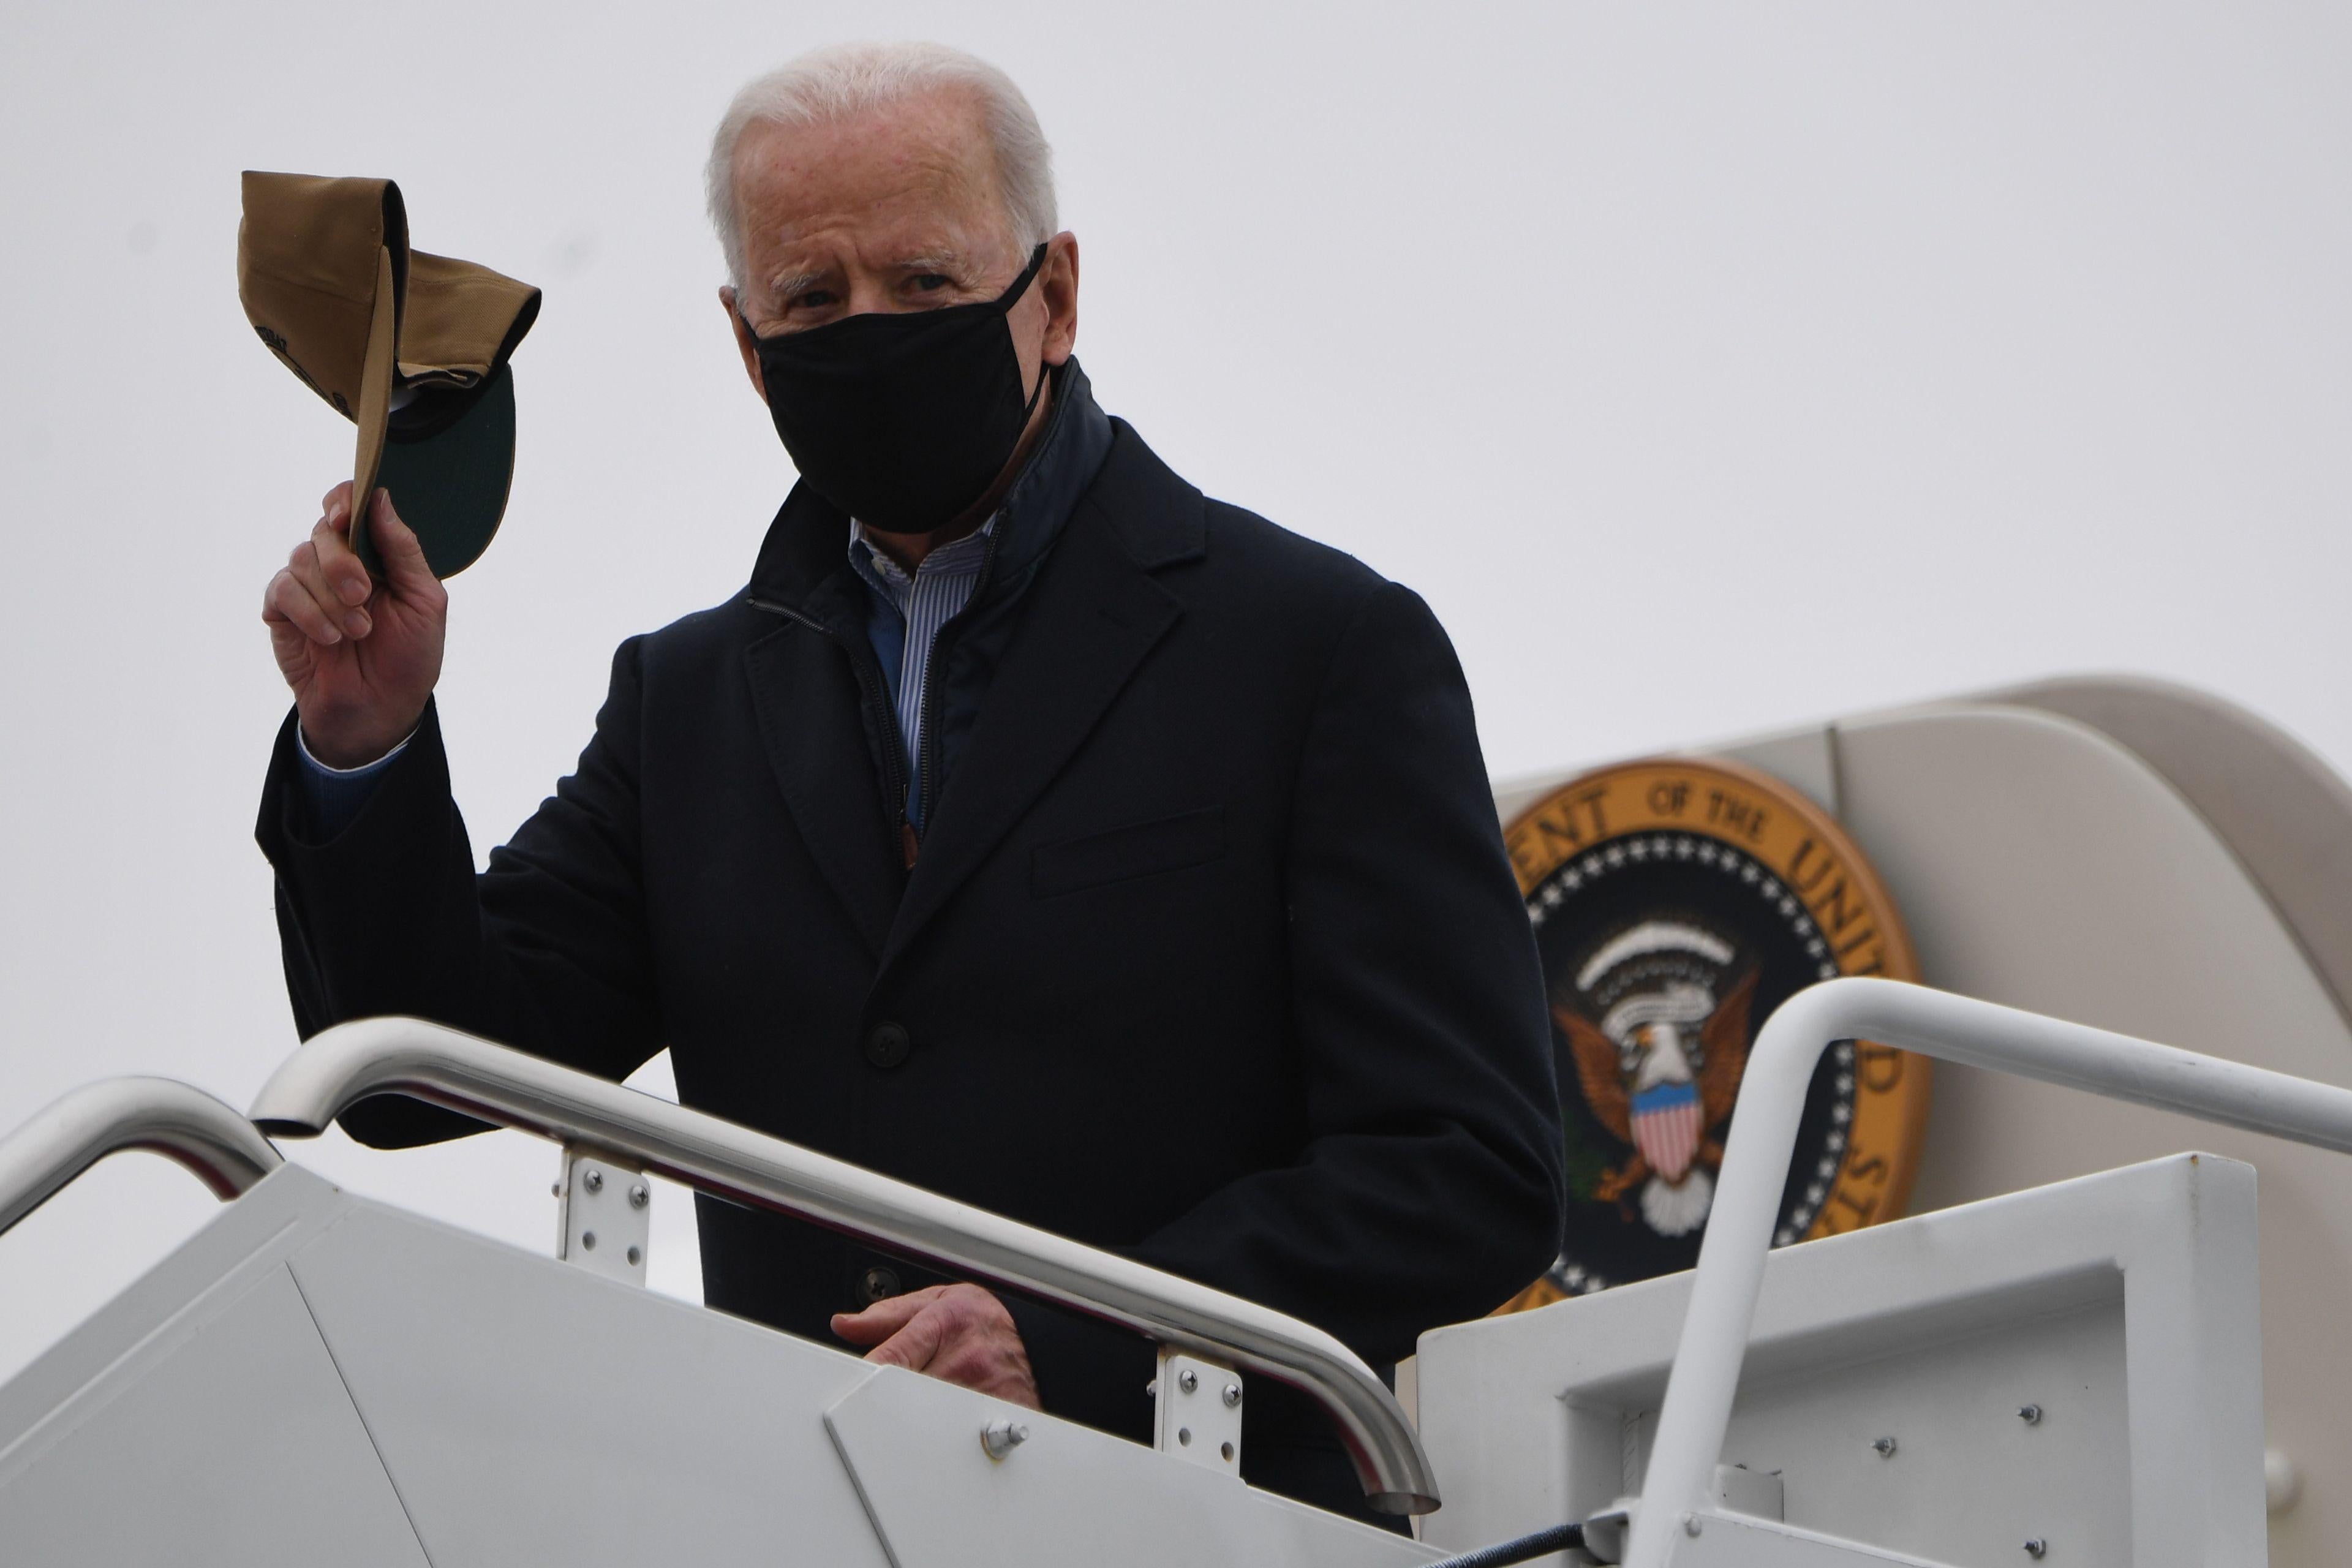 Biden stands at the top of the stairs disembarking from Air Force One, wearing a black mask and holding up a baseball cap